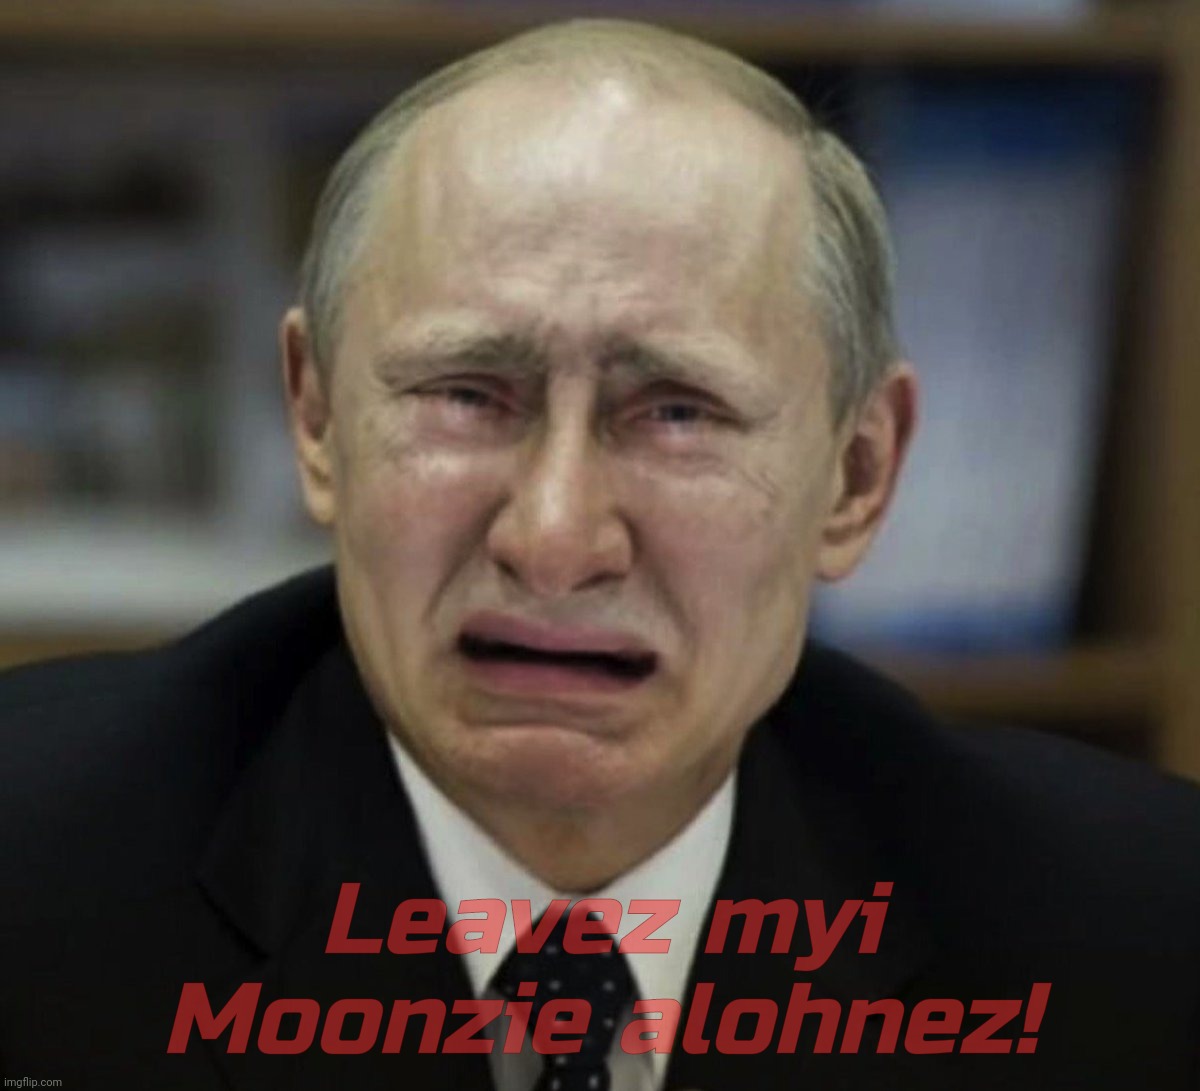 The worser of all weevils gets the big seat but Emos got feelz too ya know | Leavez myi Moonzie alohnez! | image tagged in putin cry,putin,vladimir putin,moonie,it's all about thuh feelz,so emo | made w/ Imgflip meme maker